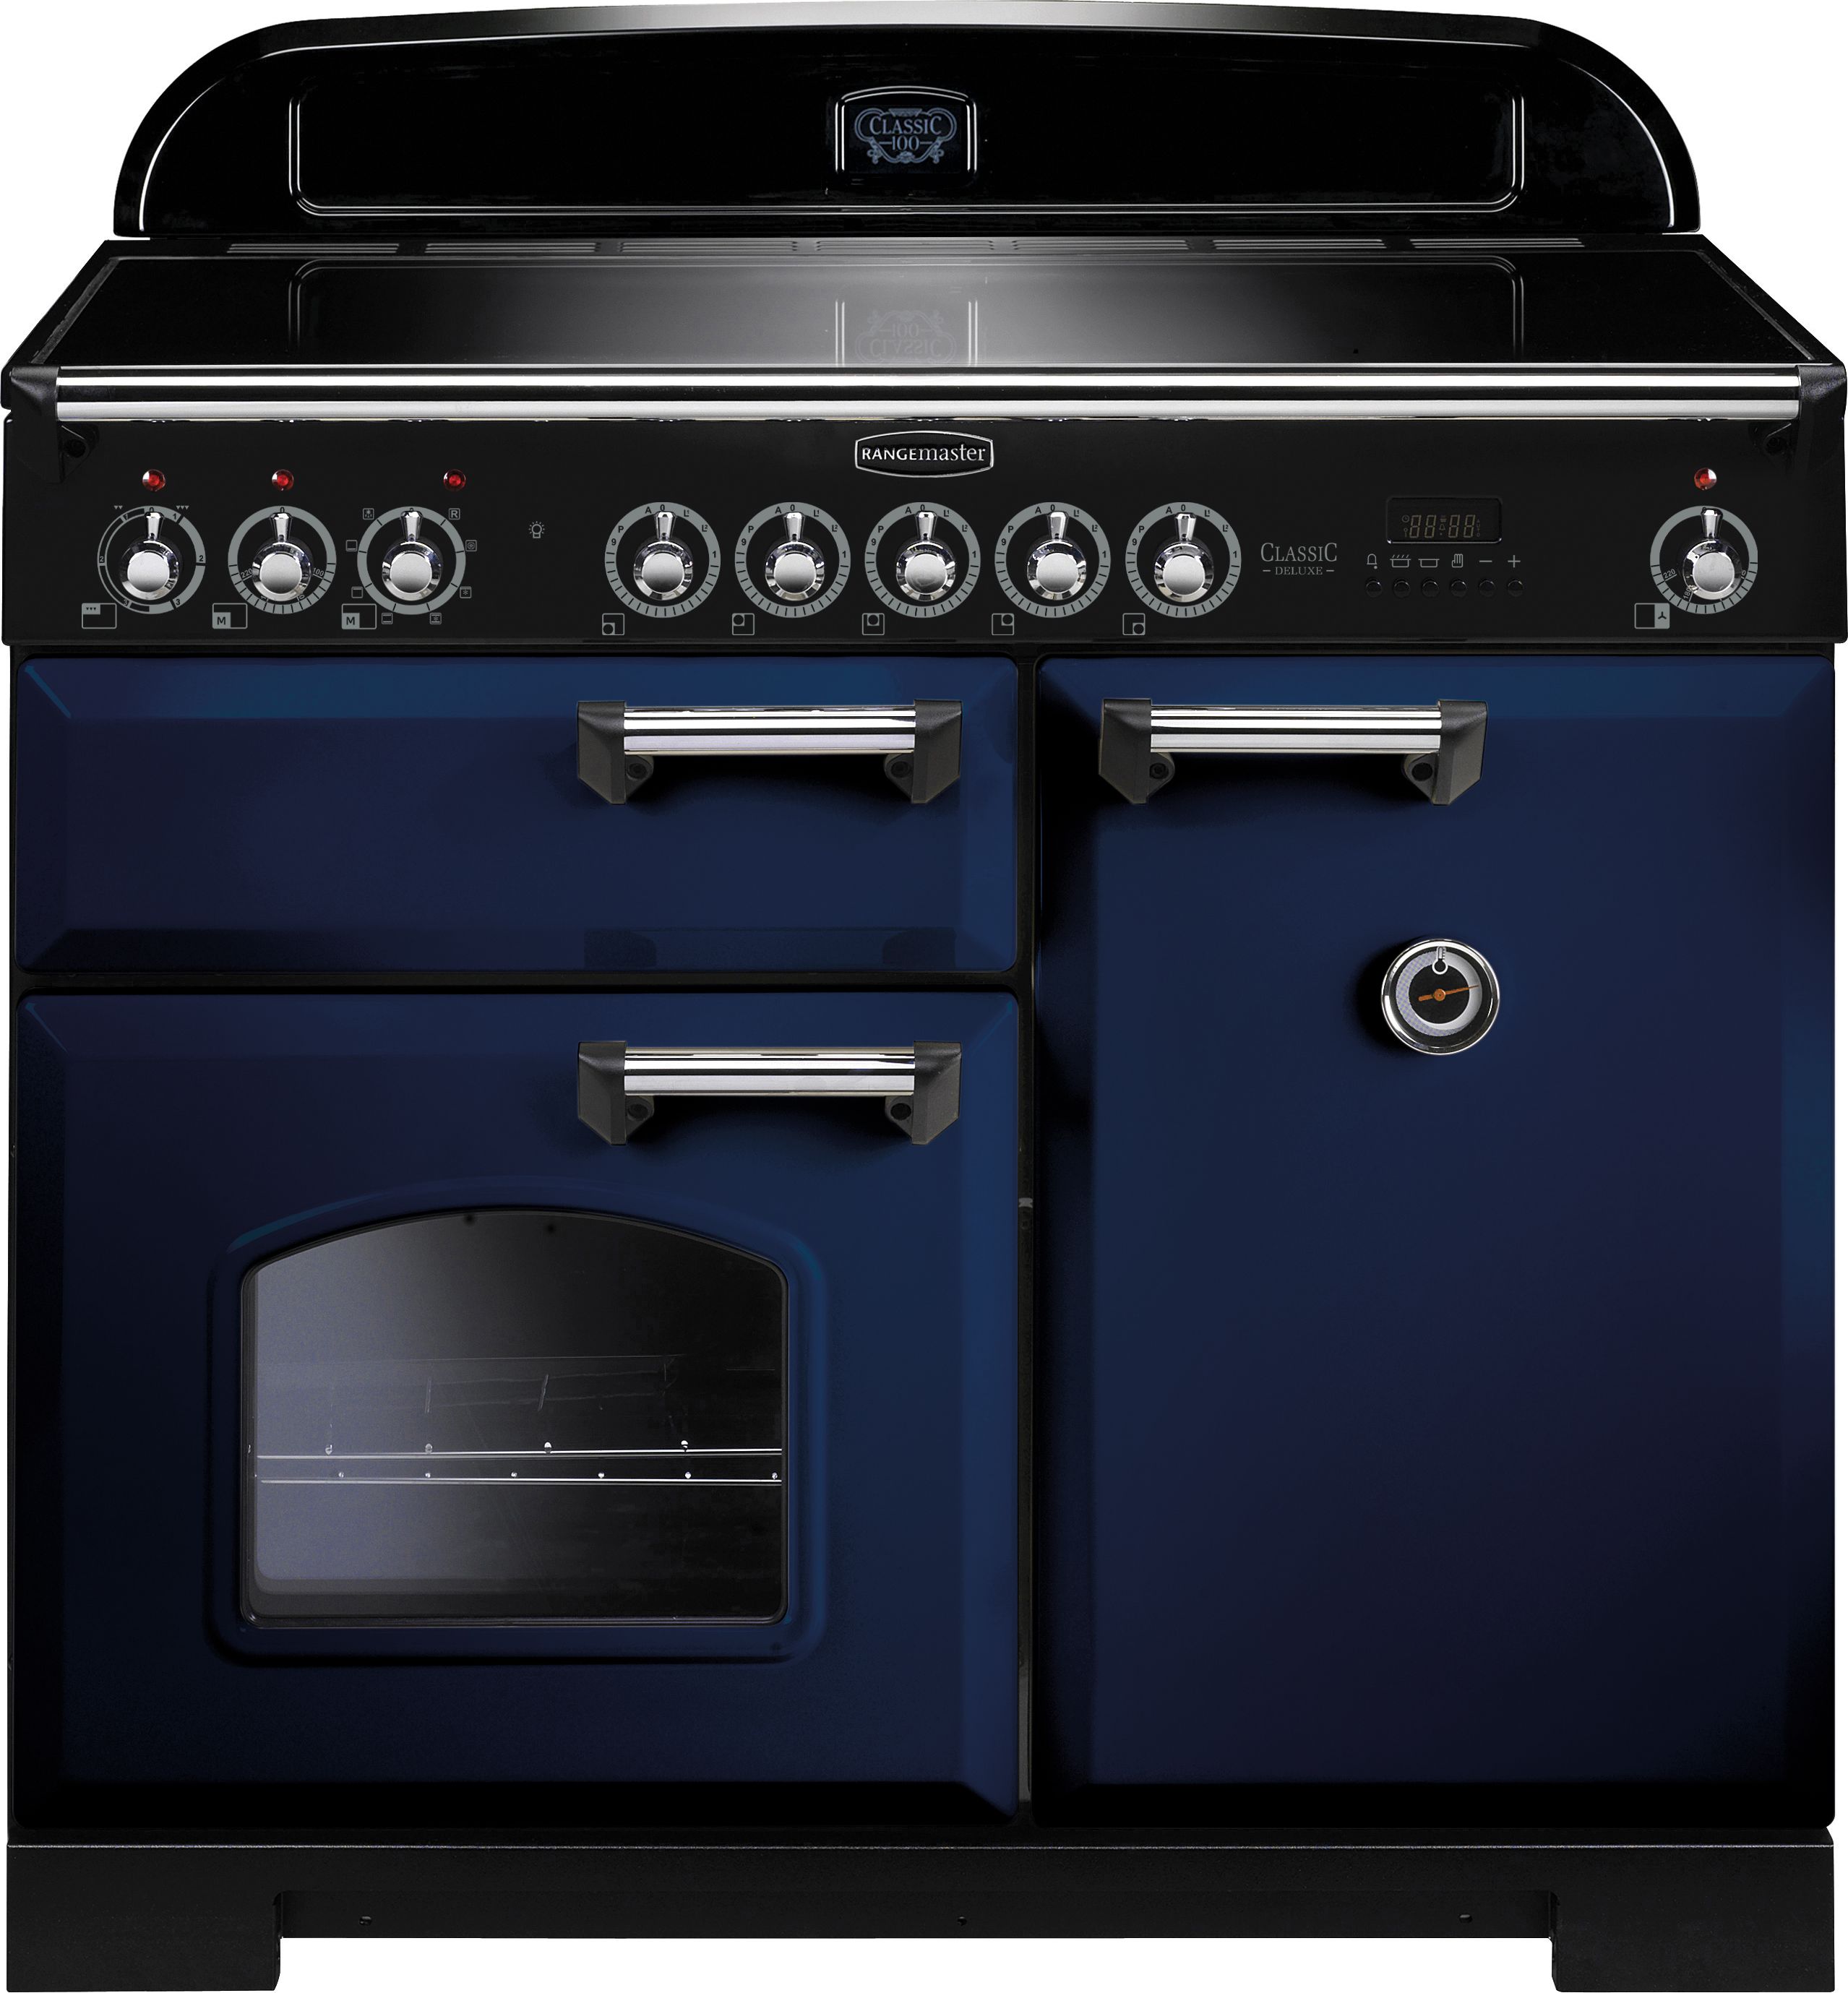 Rangemaster Classic Deluxe CDL100EIRB/C 100cm Electric Range Cooker with Induction Hob - Regal Blue / Chrome - A/A Rated, Blue